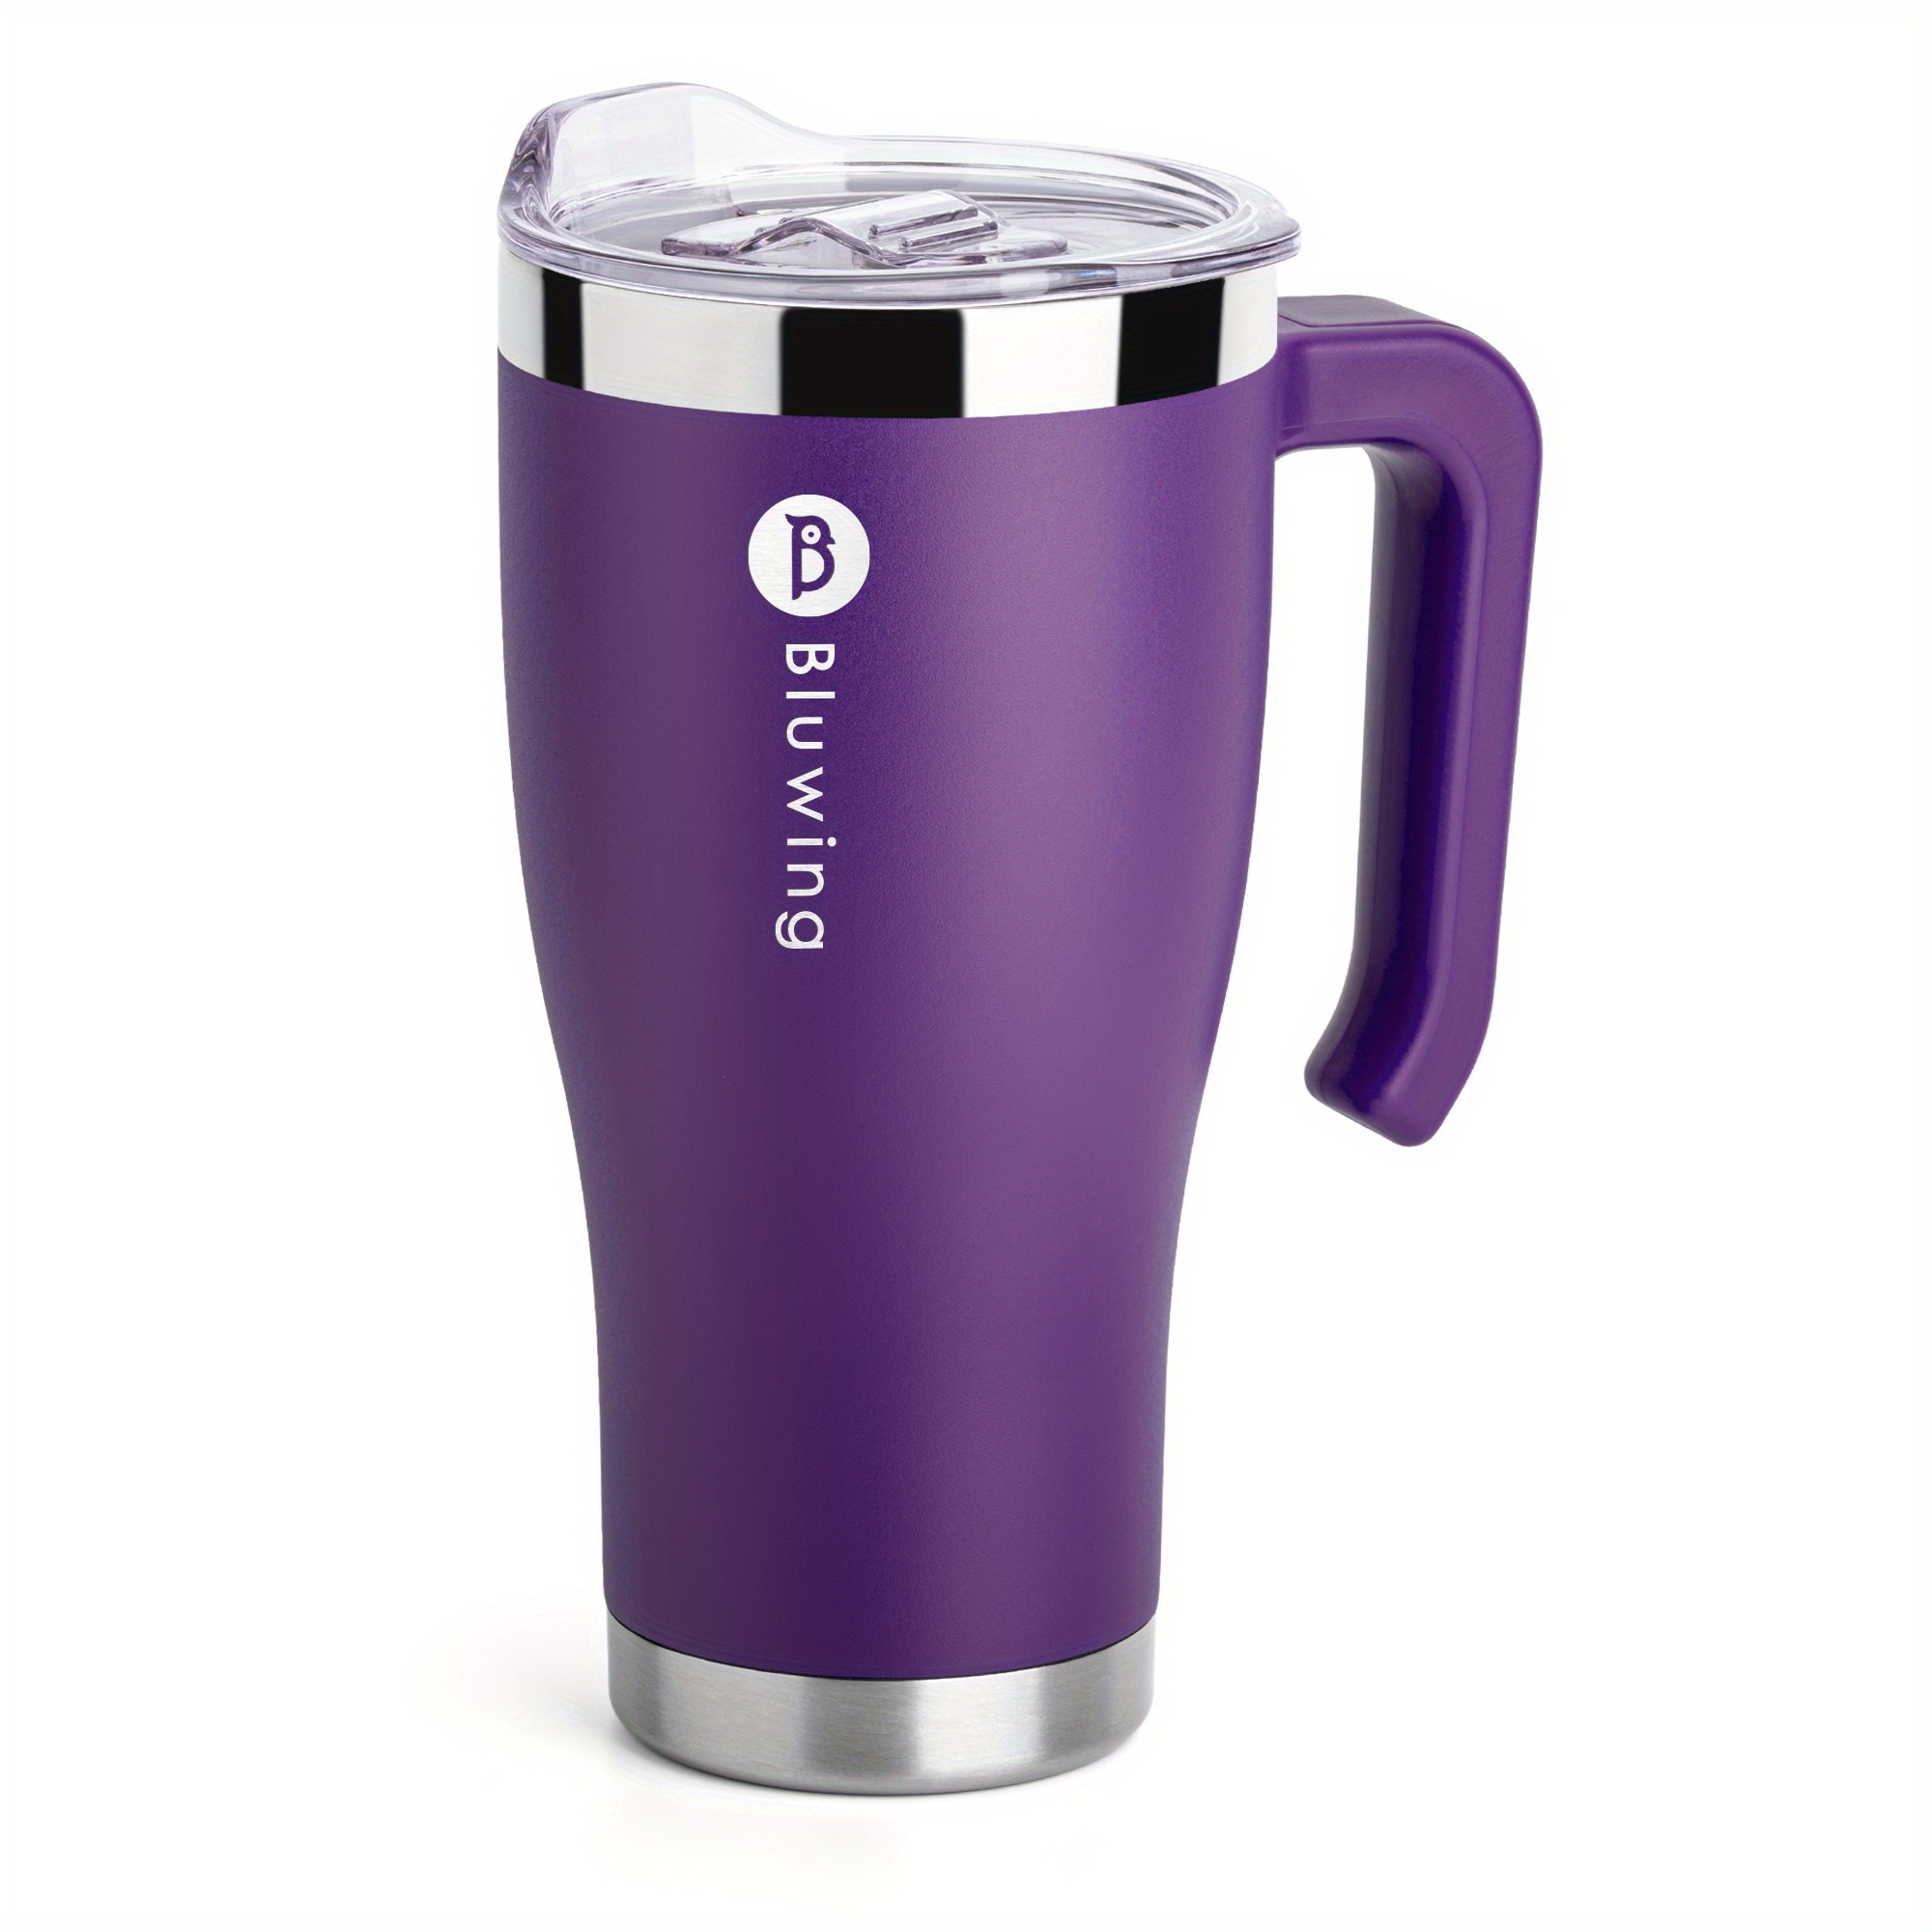 Zulay 12 oz Insulated Coffee Mug with Lid - Stainless Steel Camping Mug  Tumbler with Handle - Double Wall Vacuum Duracoated Insulated Mug For  Travel, Camping, Office, Outdoor (Purple)